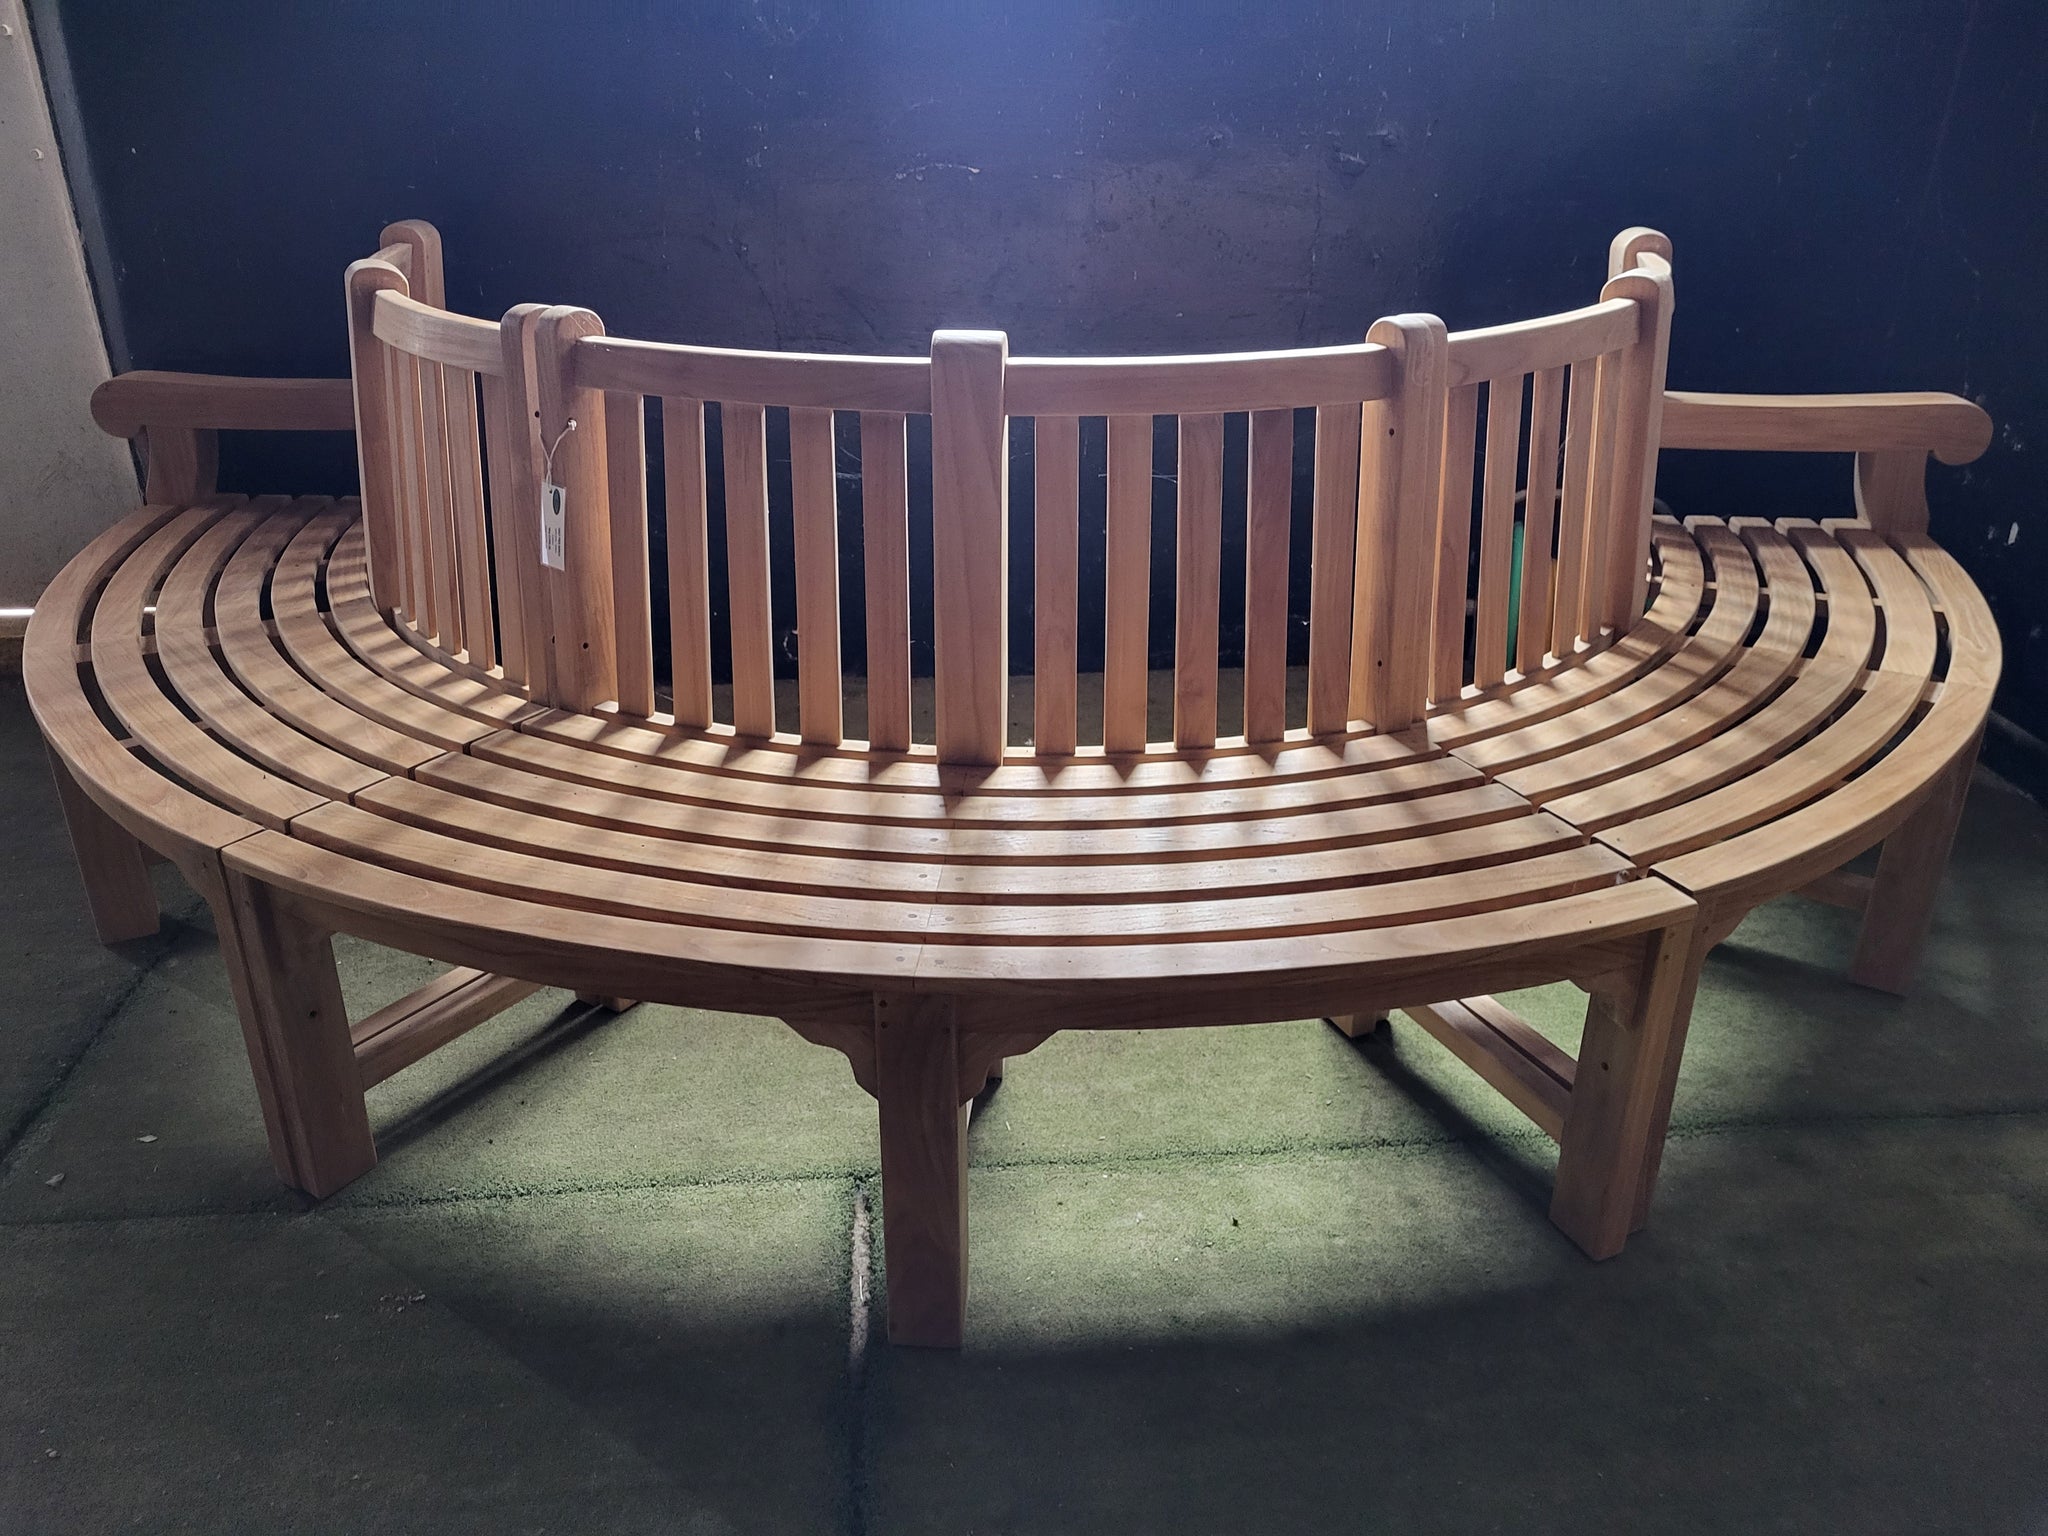 SALE - Semi-Circular Tree Bench with arms 193cm (23018-19)